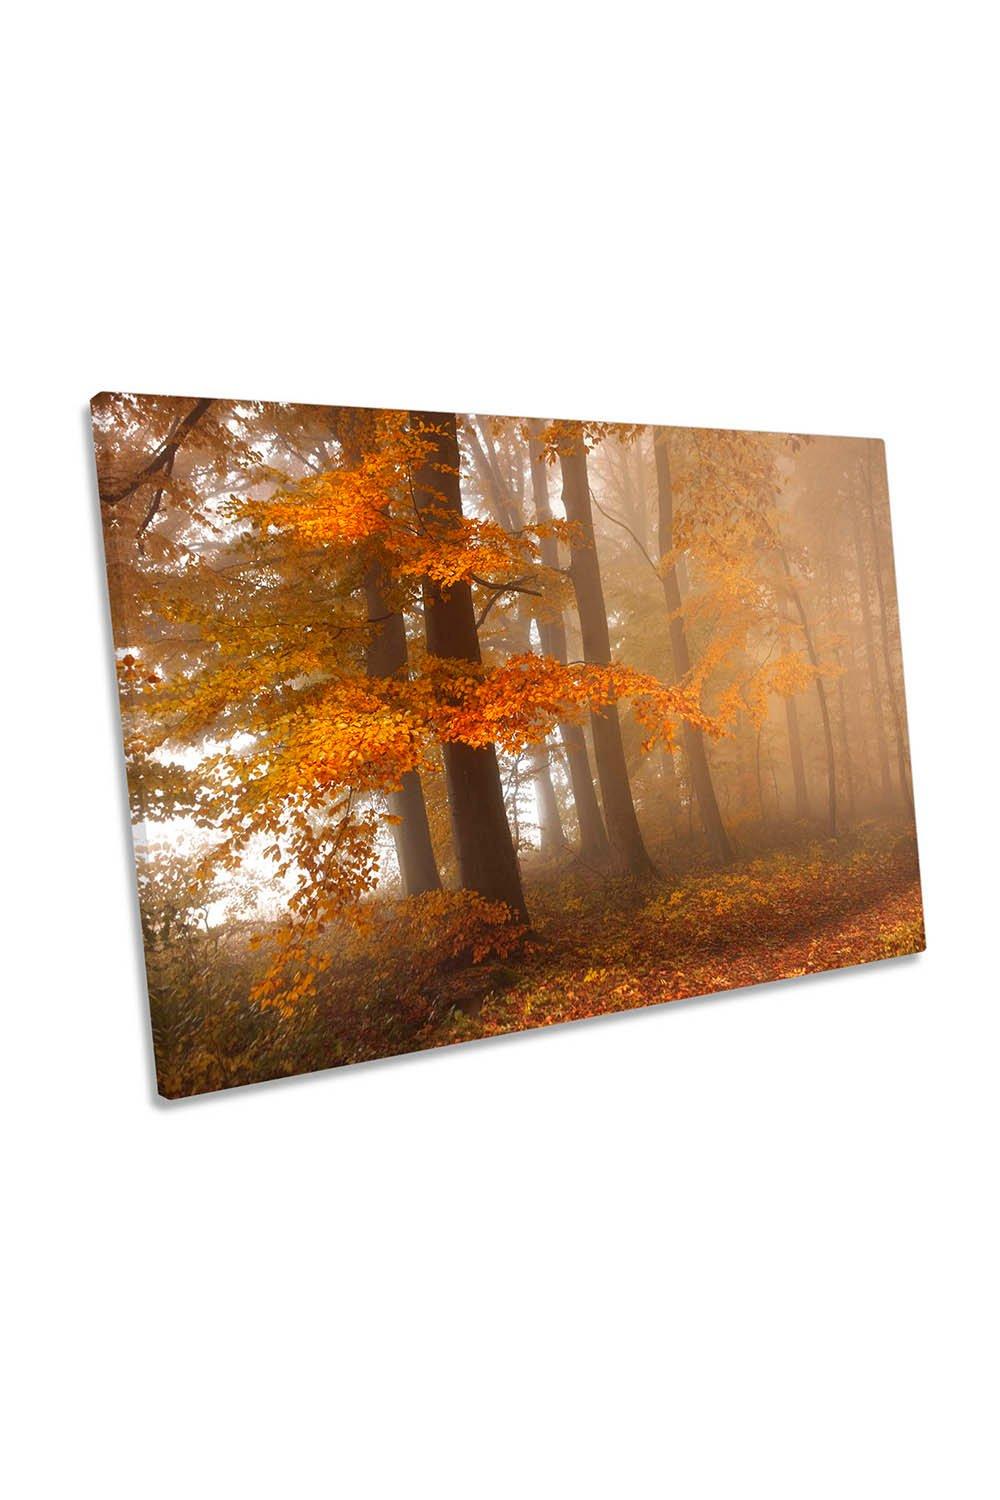 Edge of the Woods Forest Orange Canvas Wall Art Picture Print